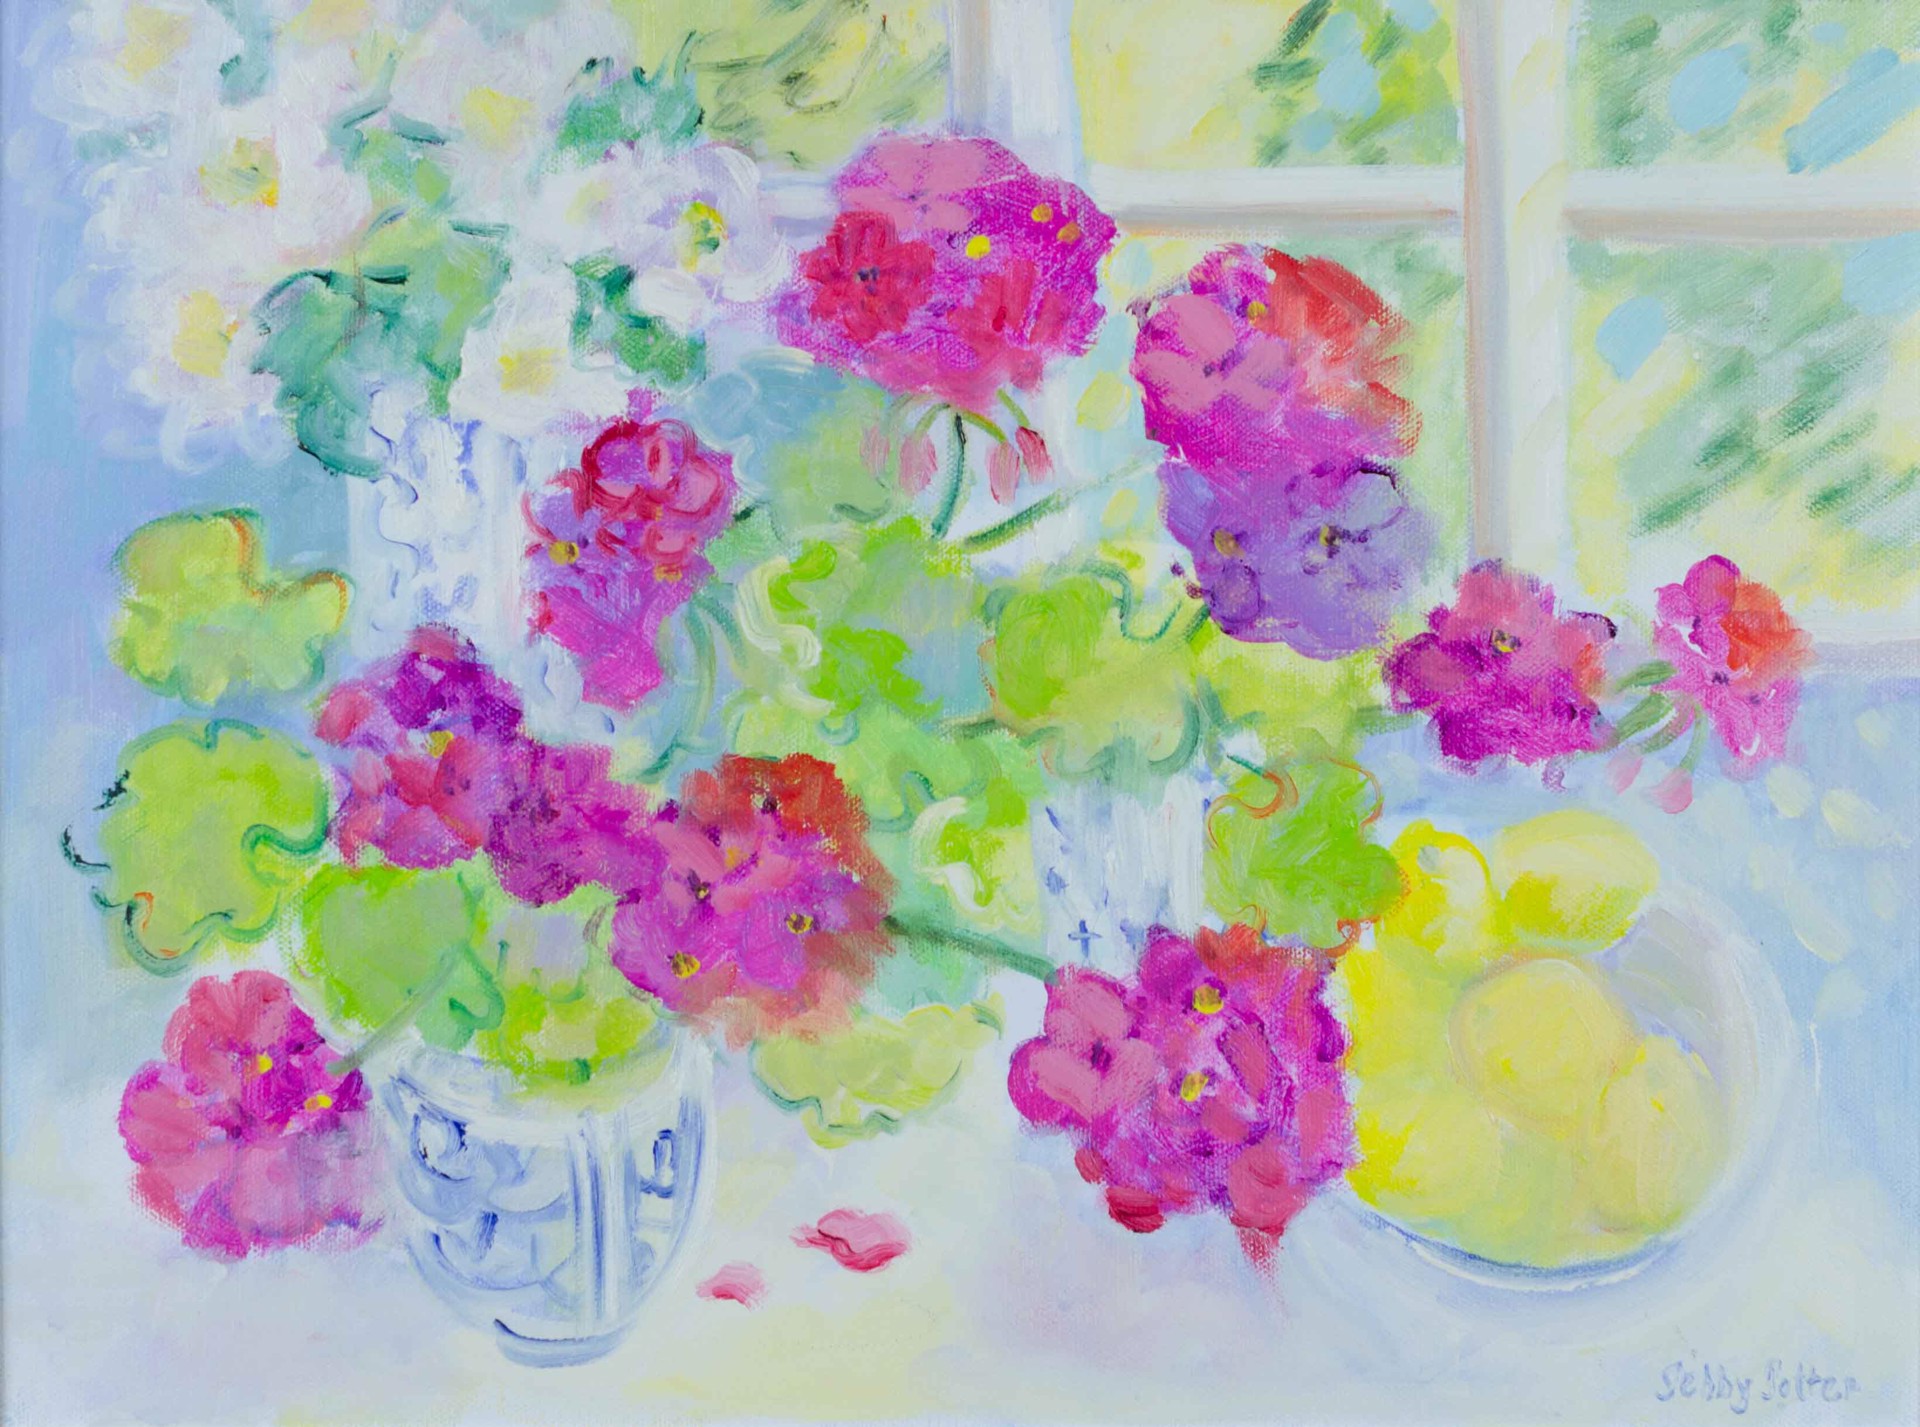 Geraniums by the Sea by Jebby Potter